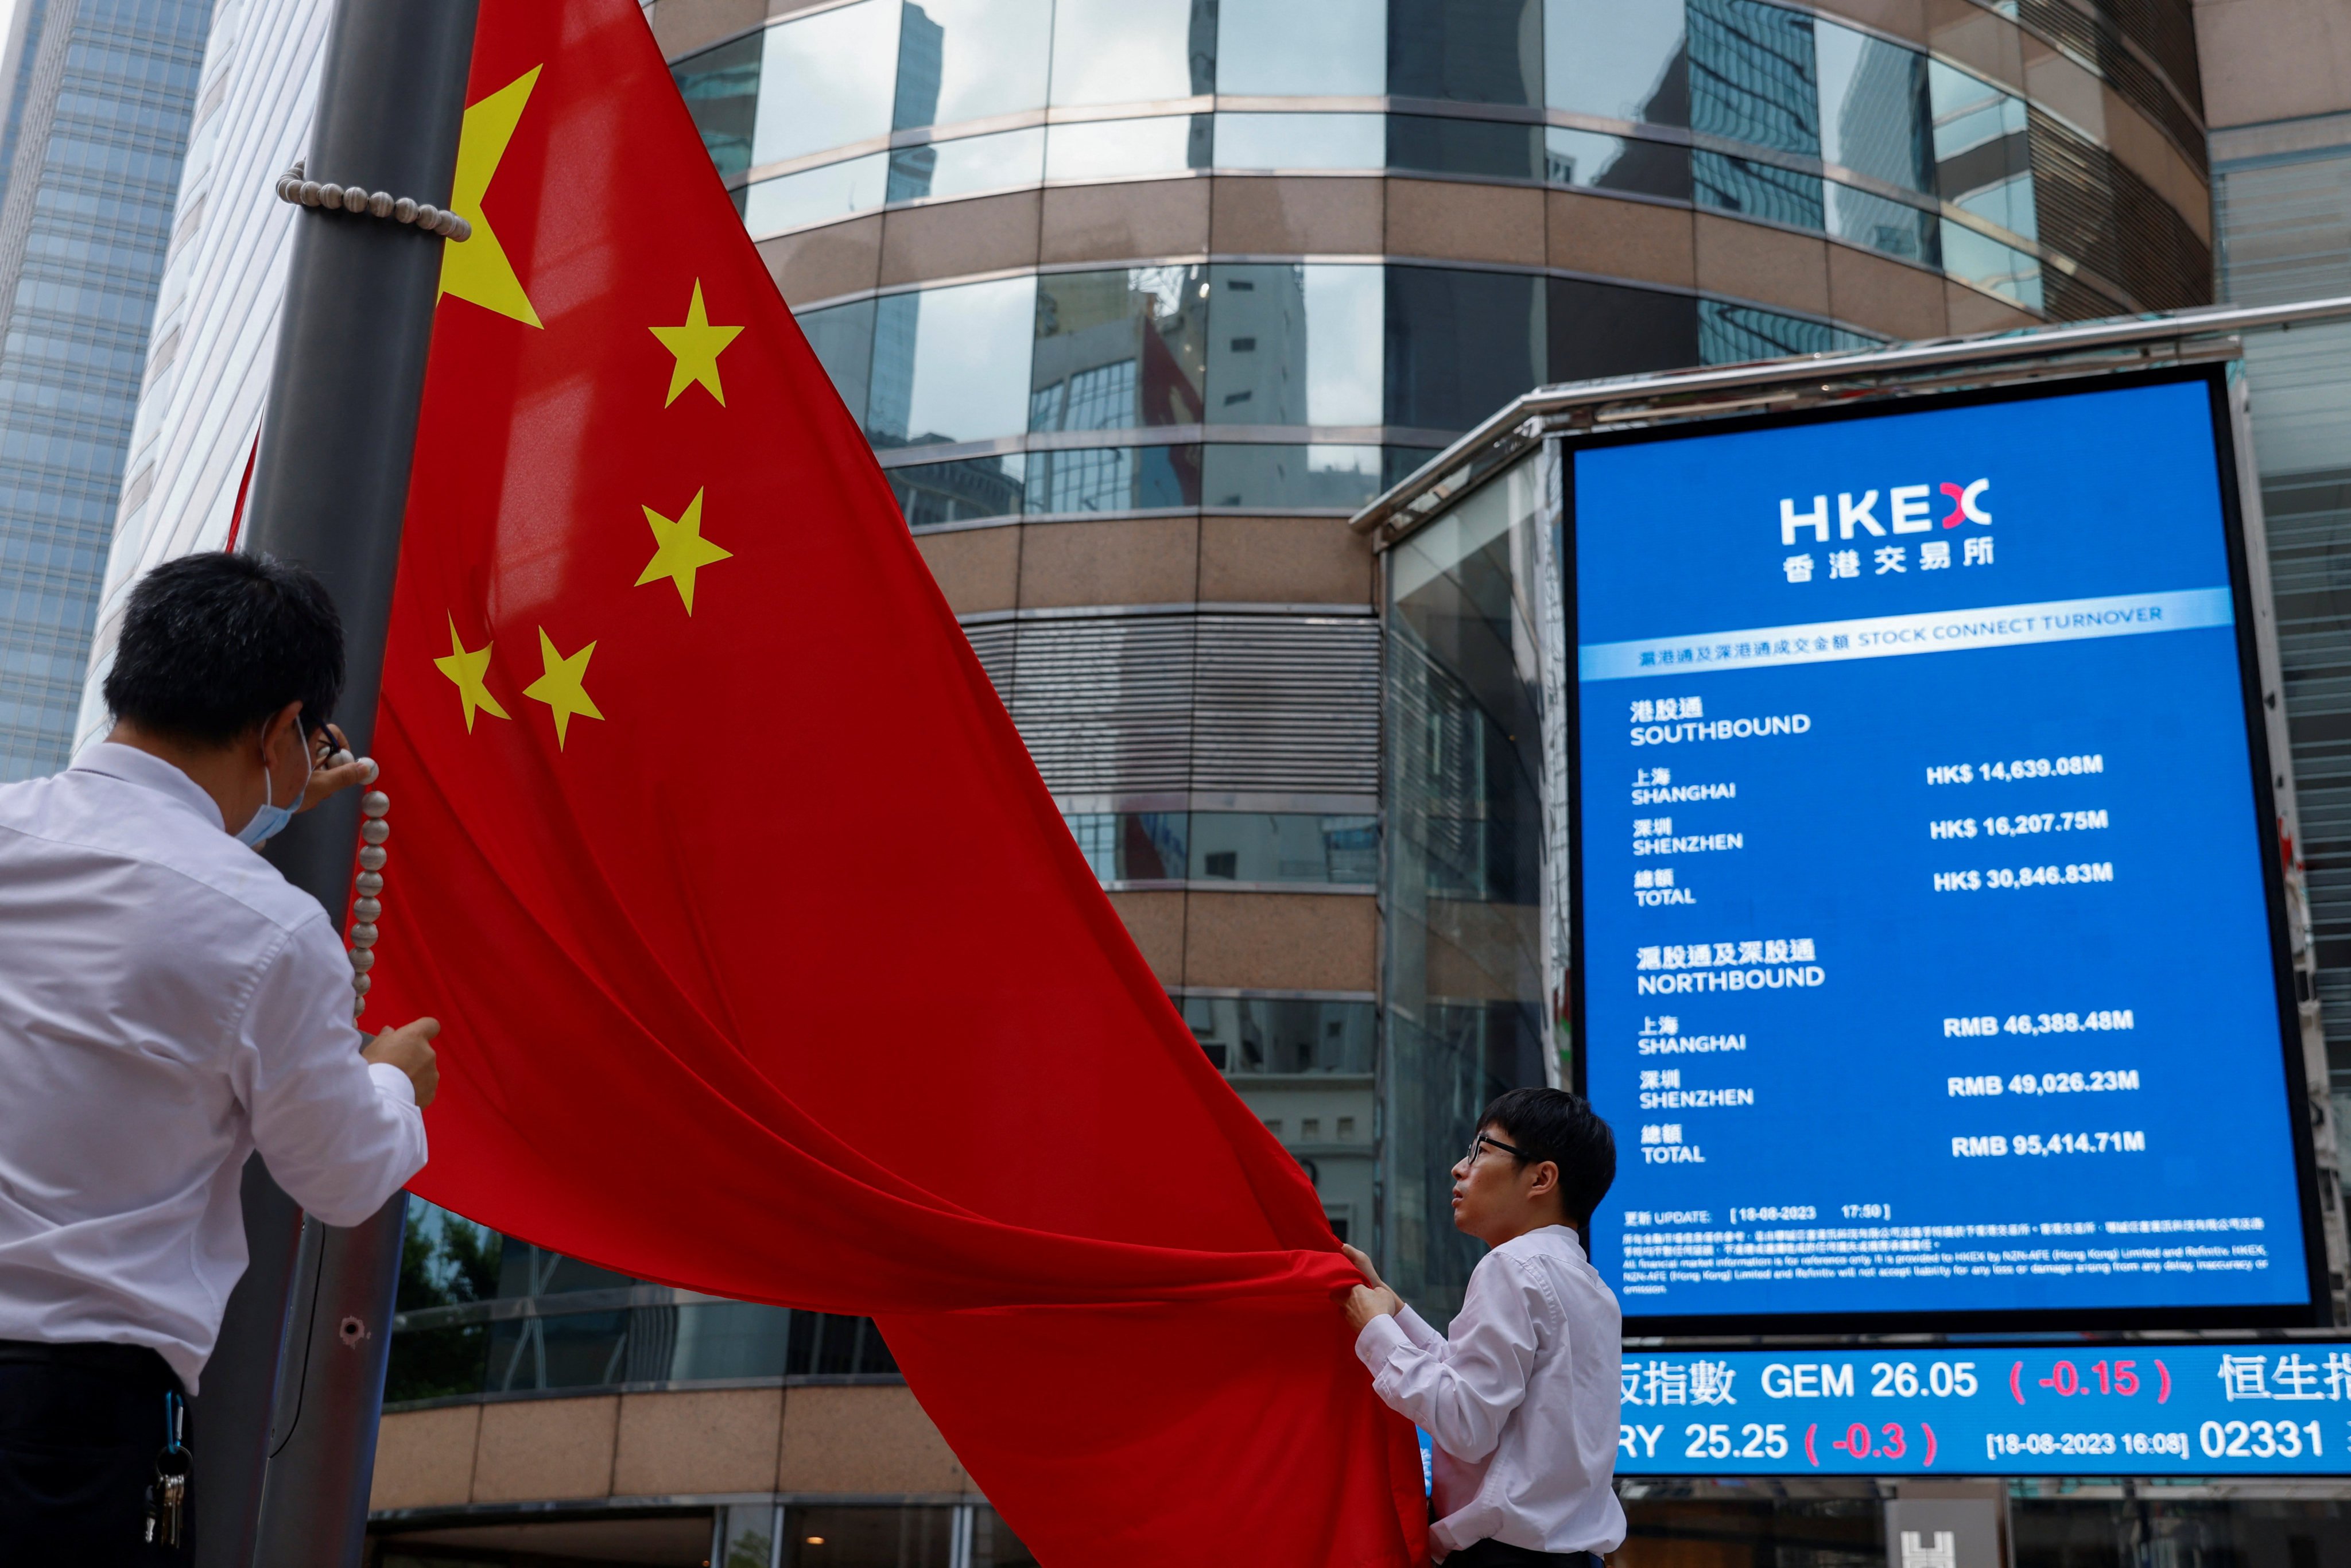 The Chinese national flag in front of screens showing the index and stock prices outside Exchange Square in Central, Hong Kong. Photo: Reuters